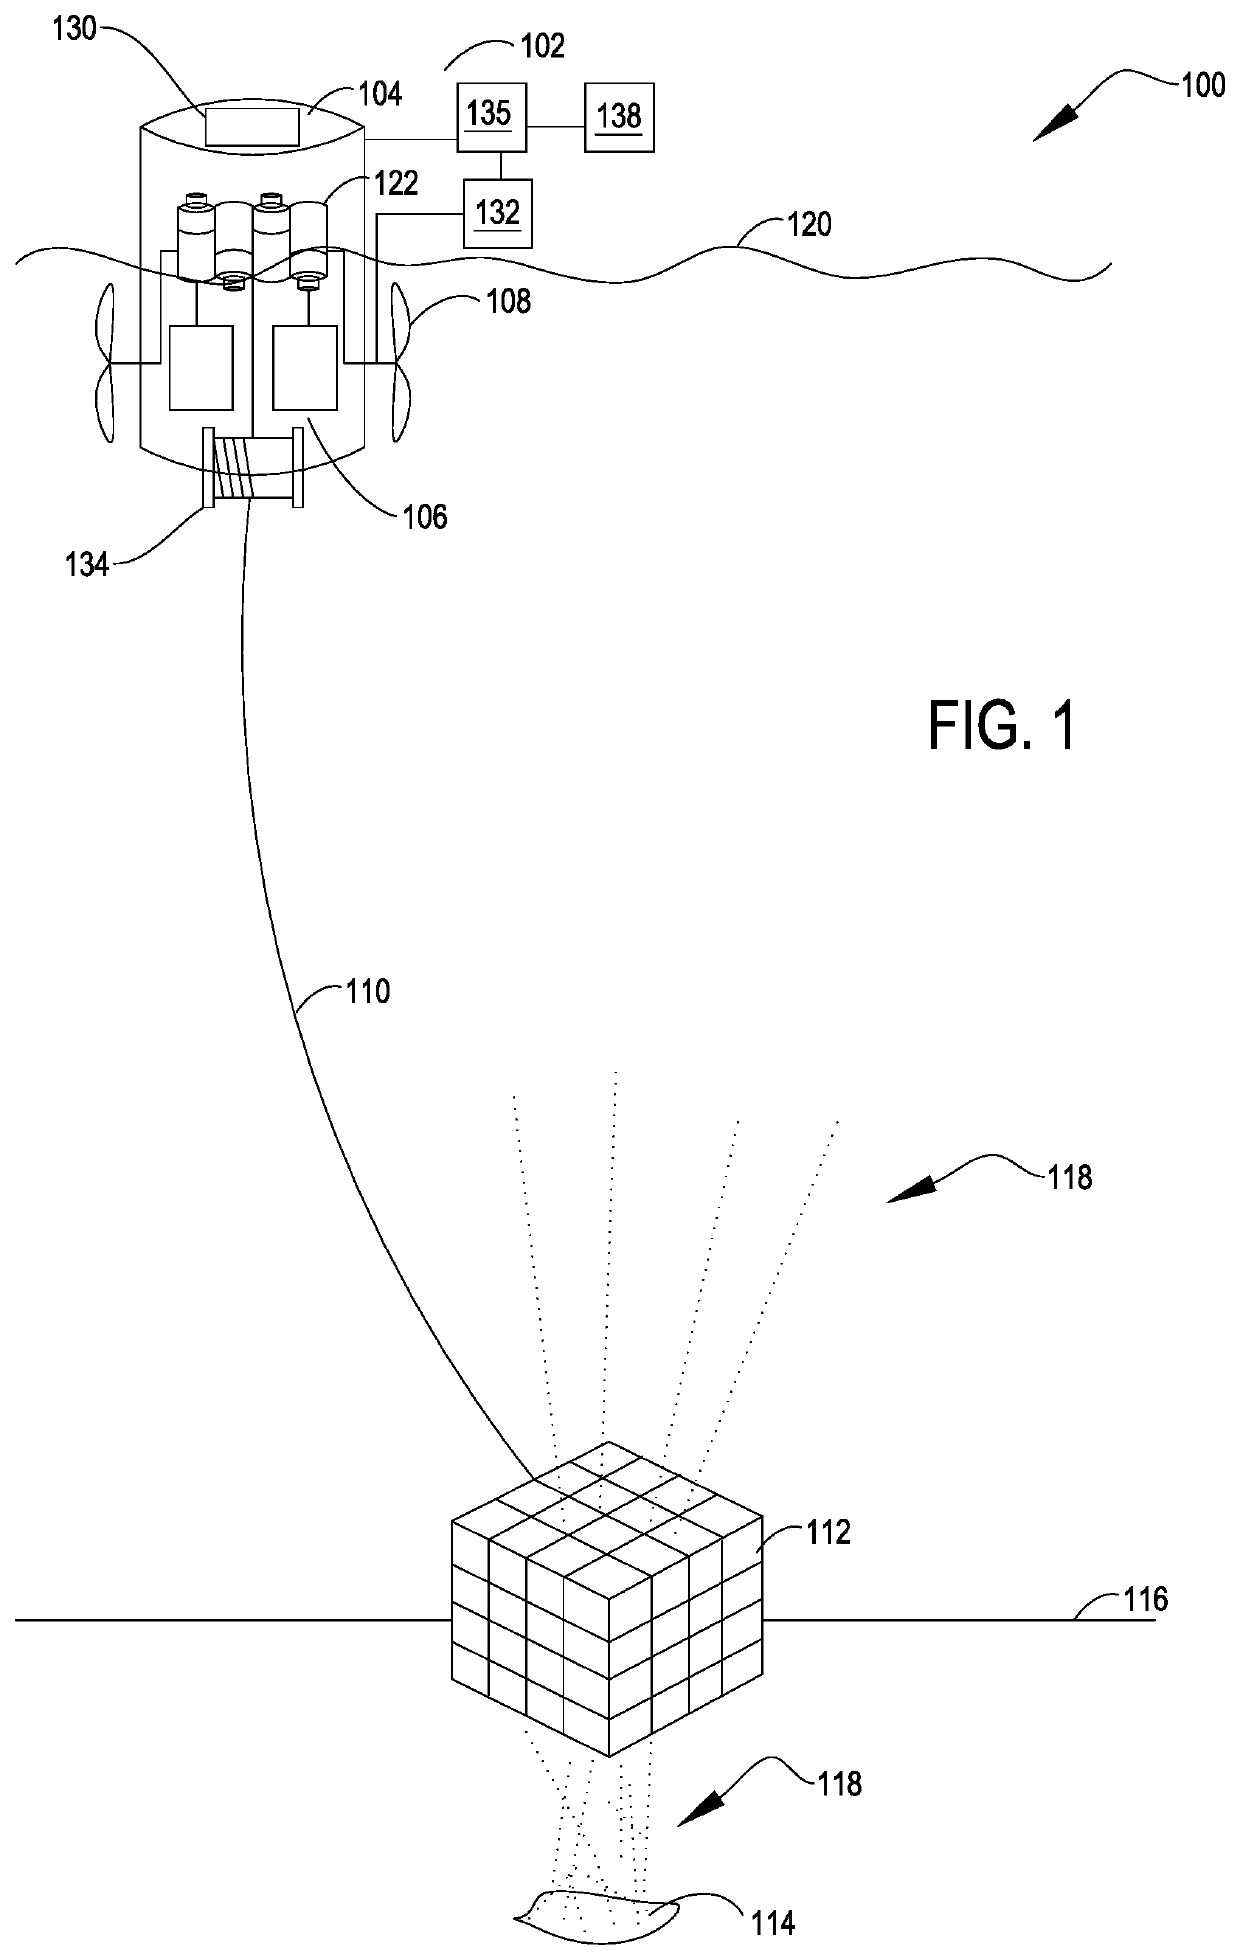 Hydrothermal vent energy harvesting, storage, and power distribution system